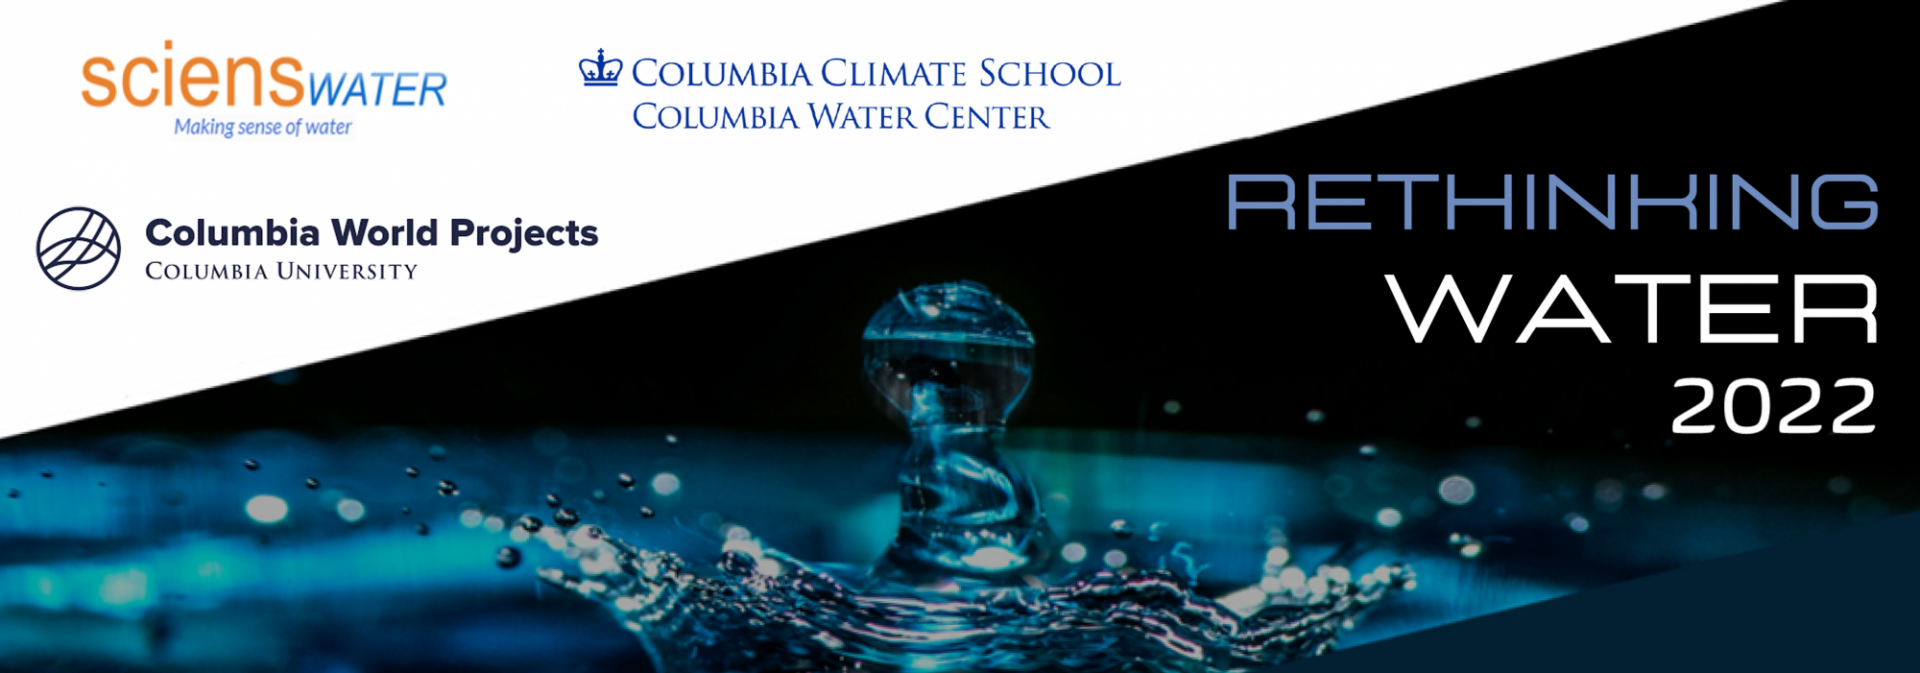 Rethinking Water banner image with logos from Columbia Water Center, Sciens Water, and Columbia World Projects